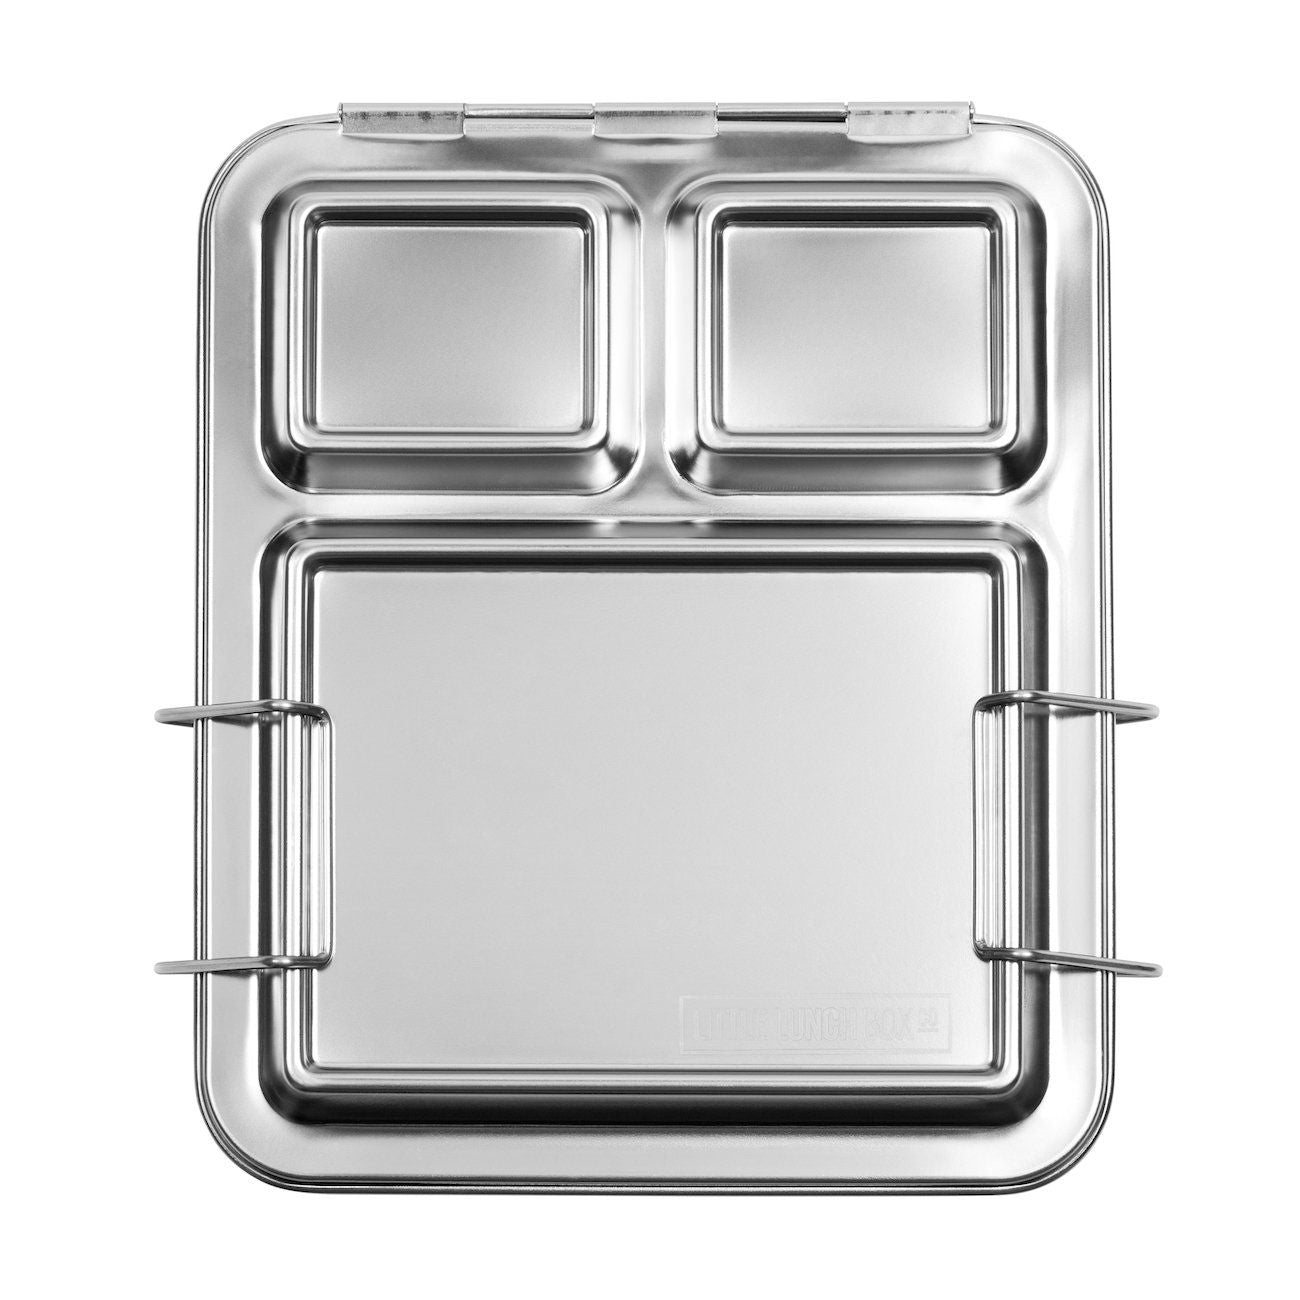 Little Lunch Box Co Leakproof Bento Lunch Box - Bento Stainless Maxi